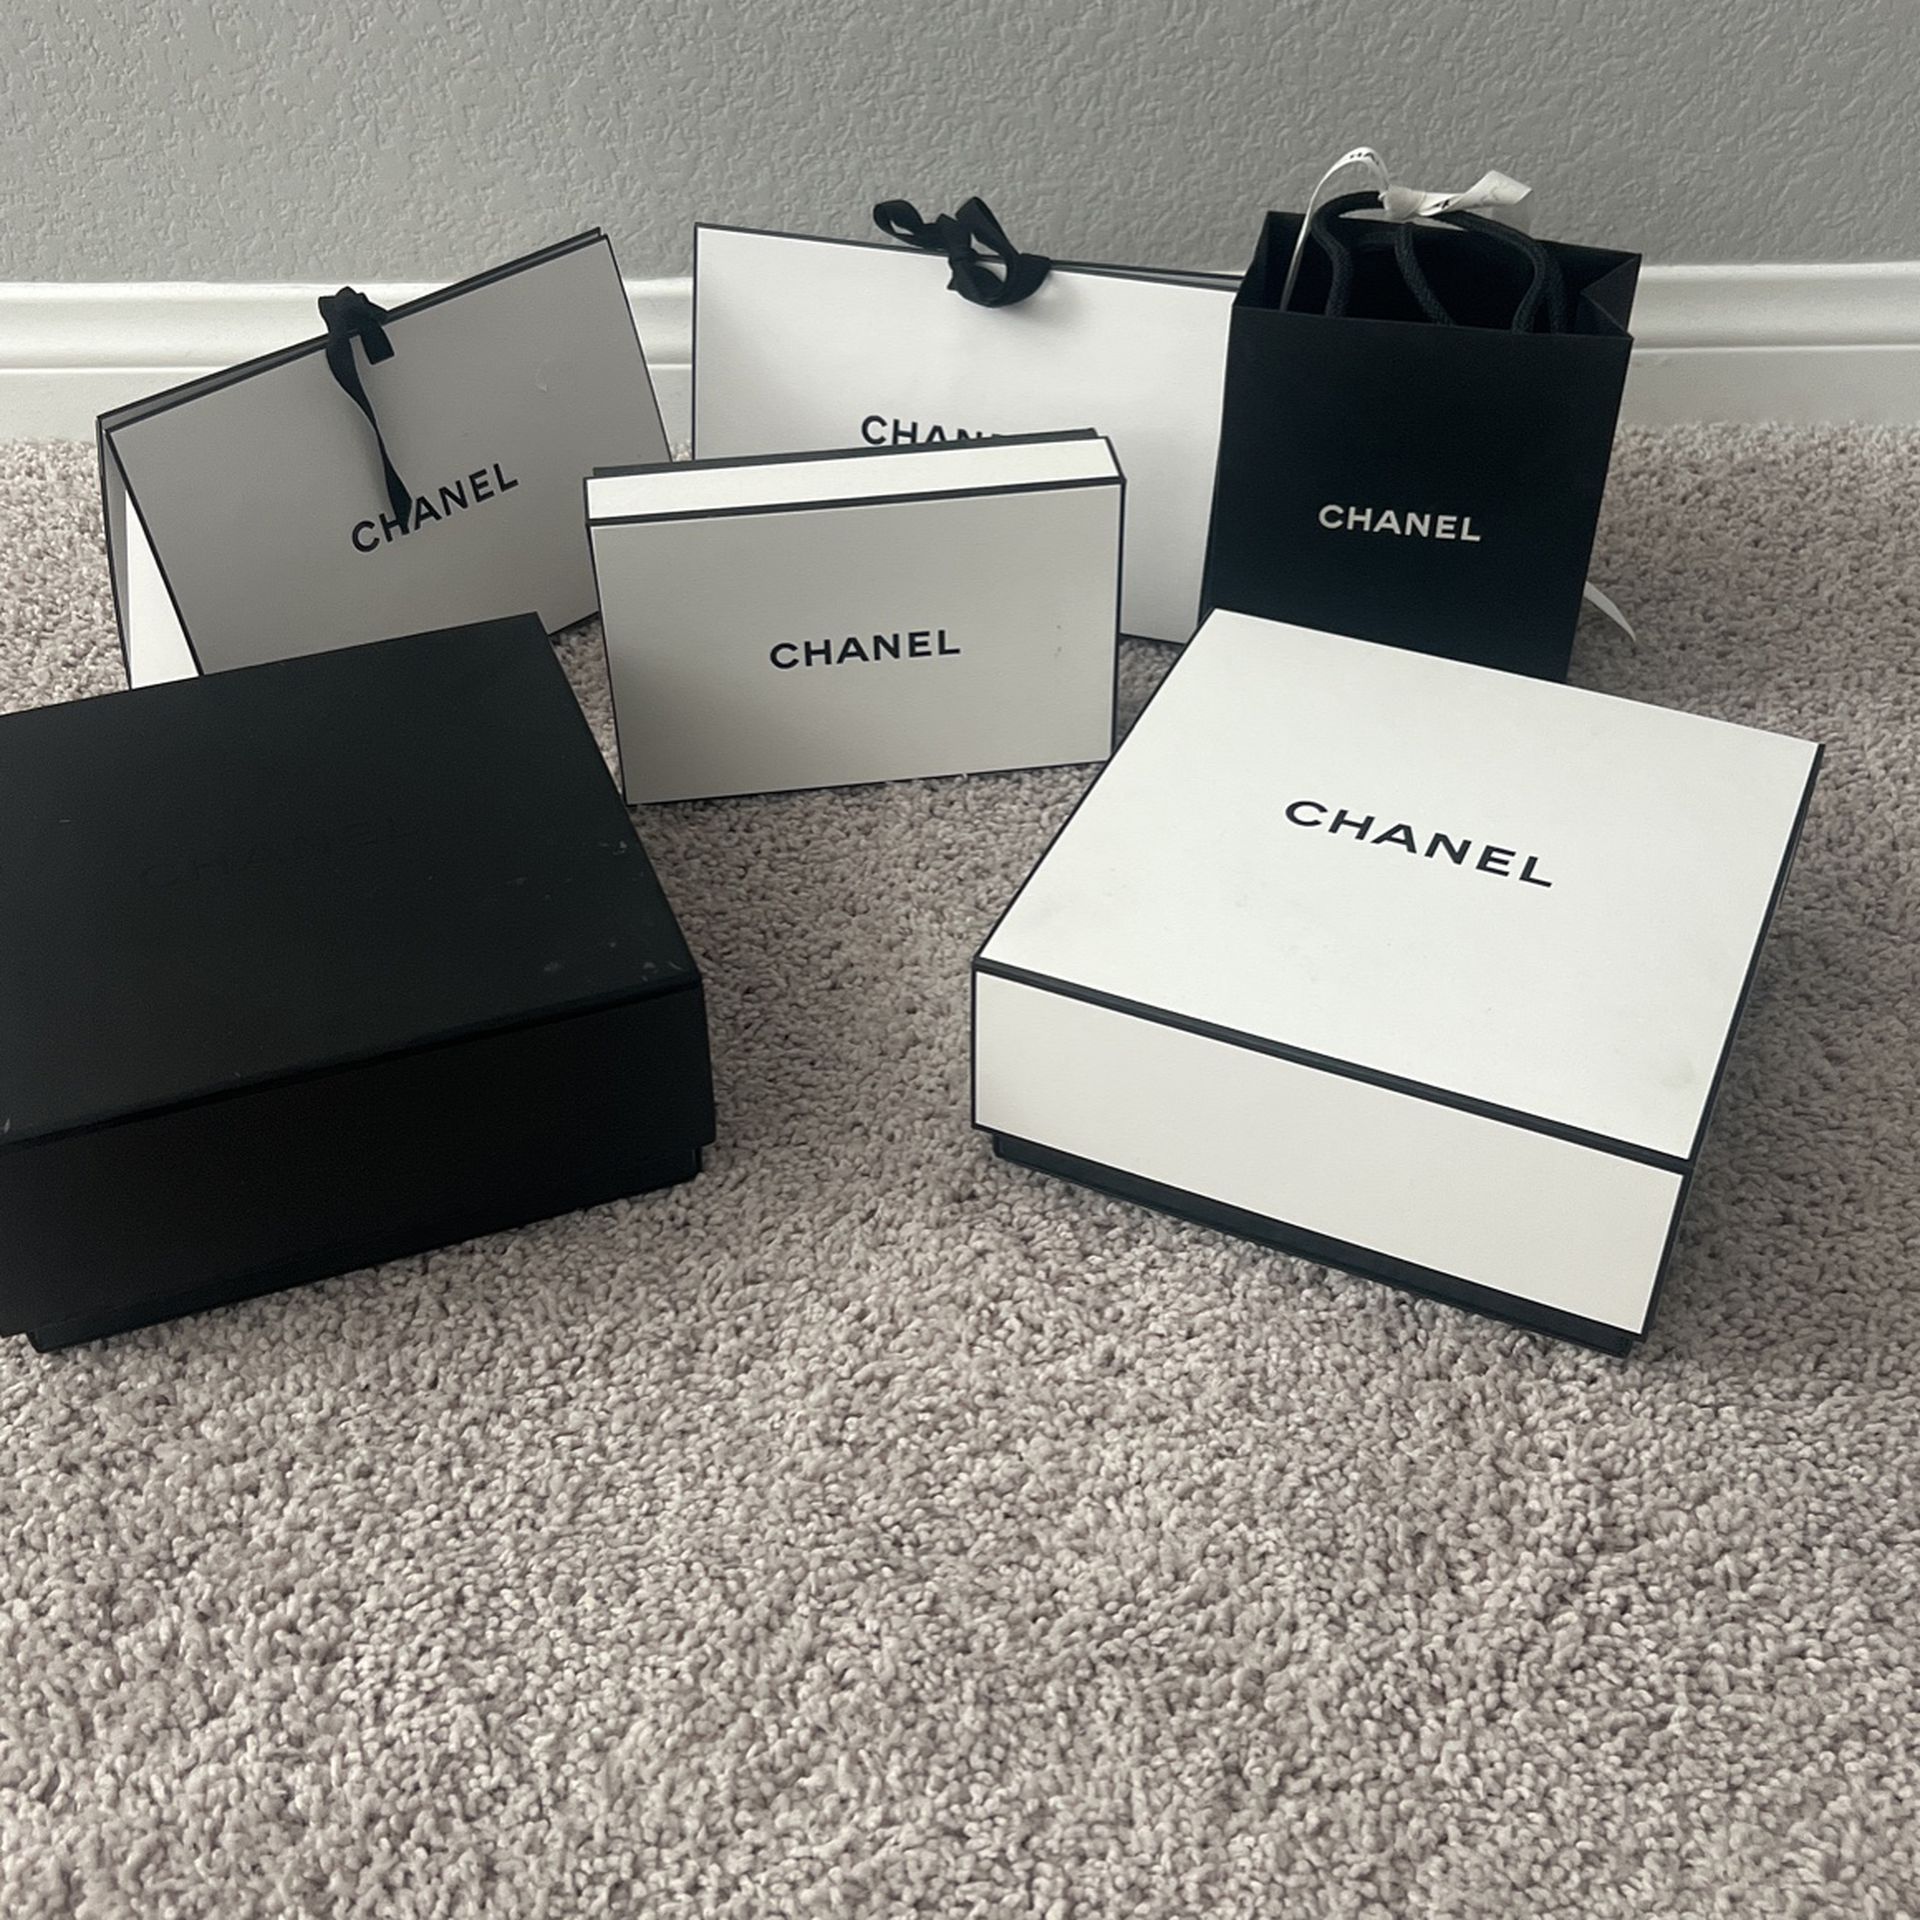 Chanel Boxes for Sale in Las Vegas, NV - OfferUp